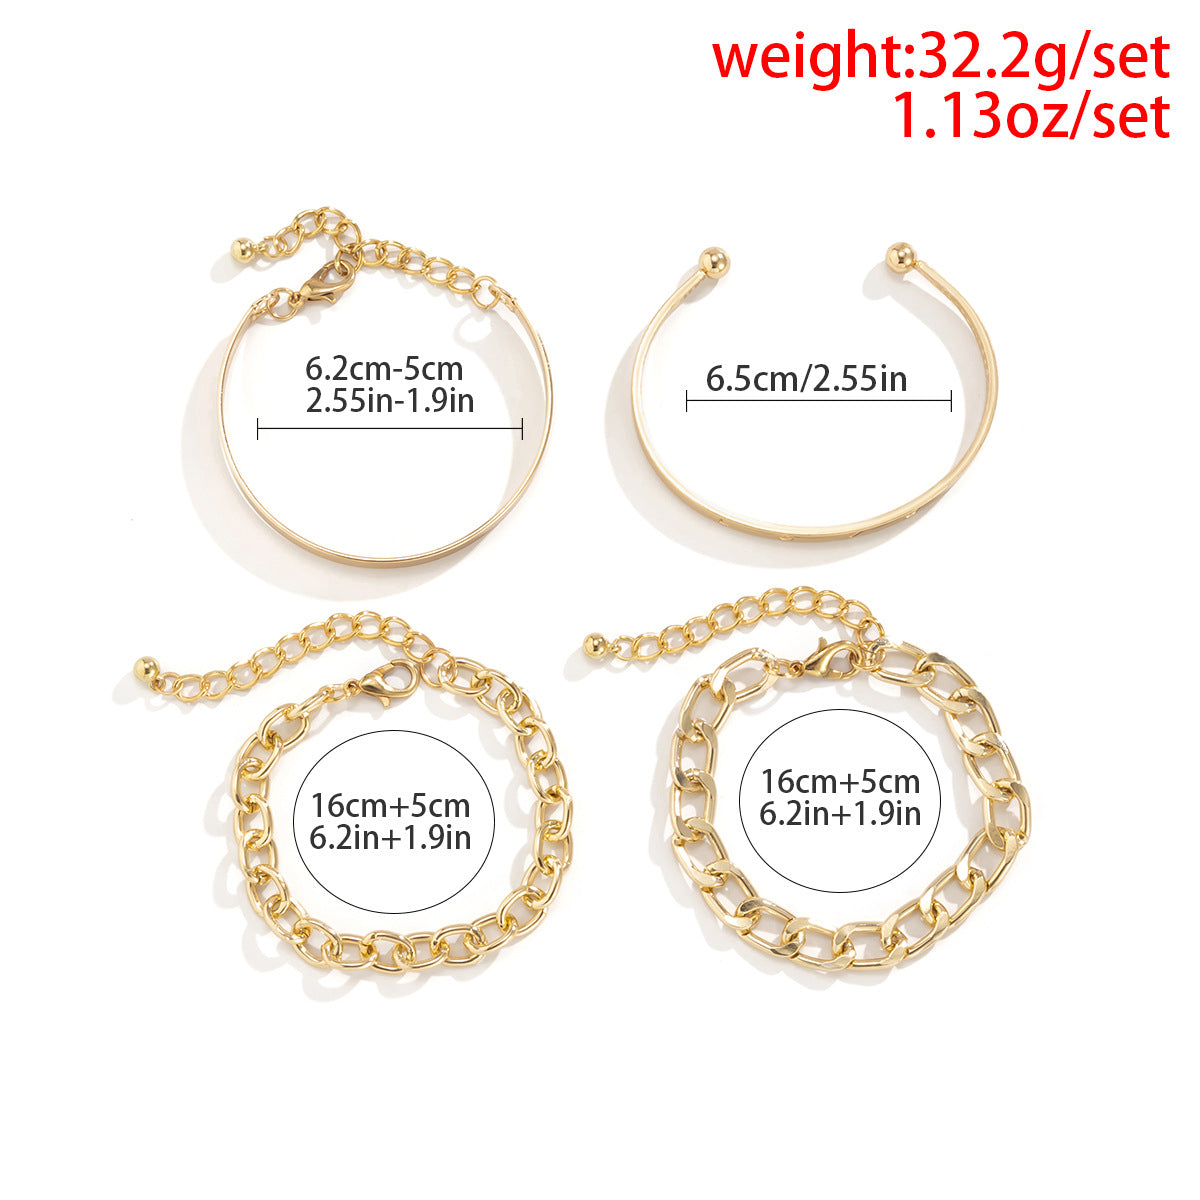 Simple And Smooth C-shaped Hollow Chain Bracelet Set